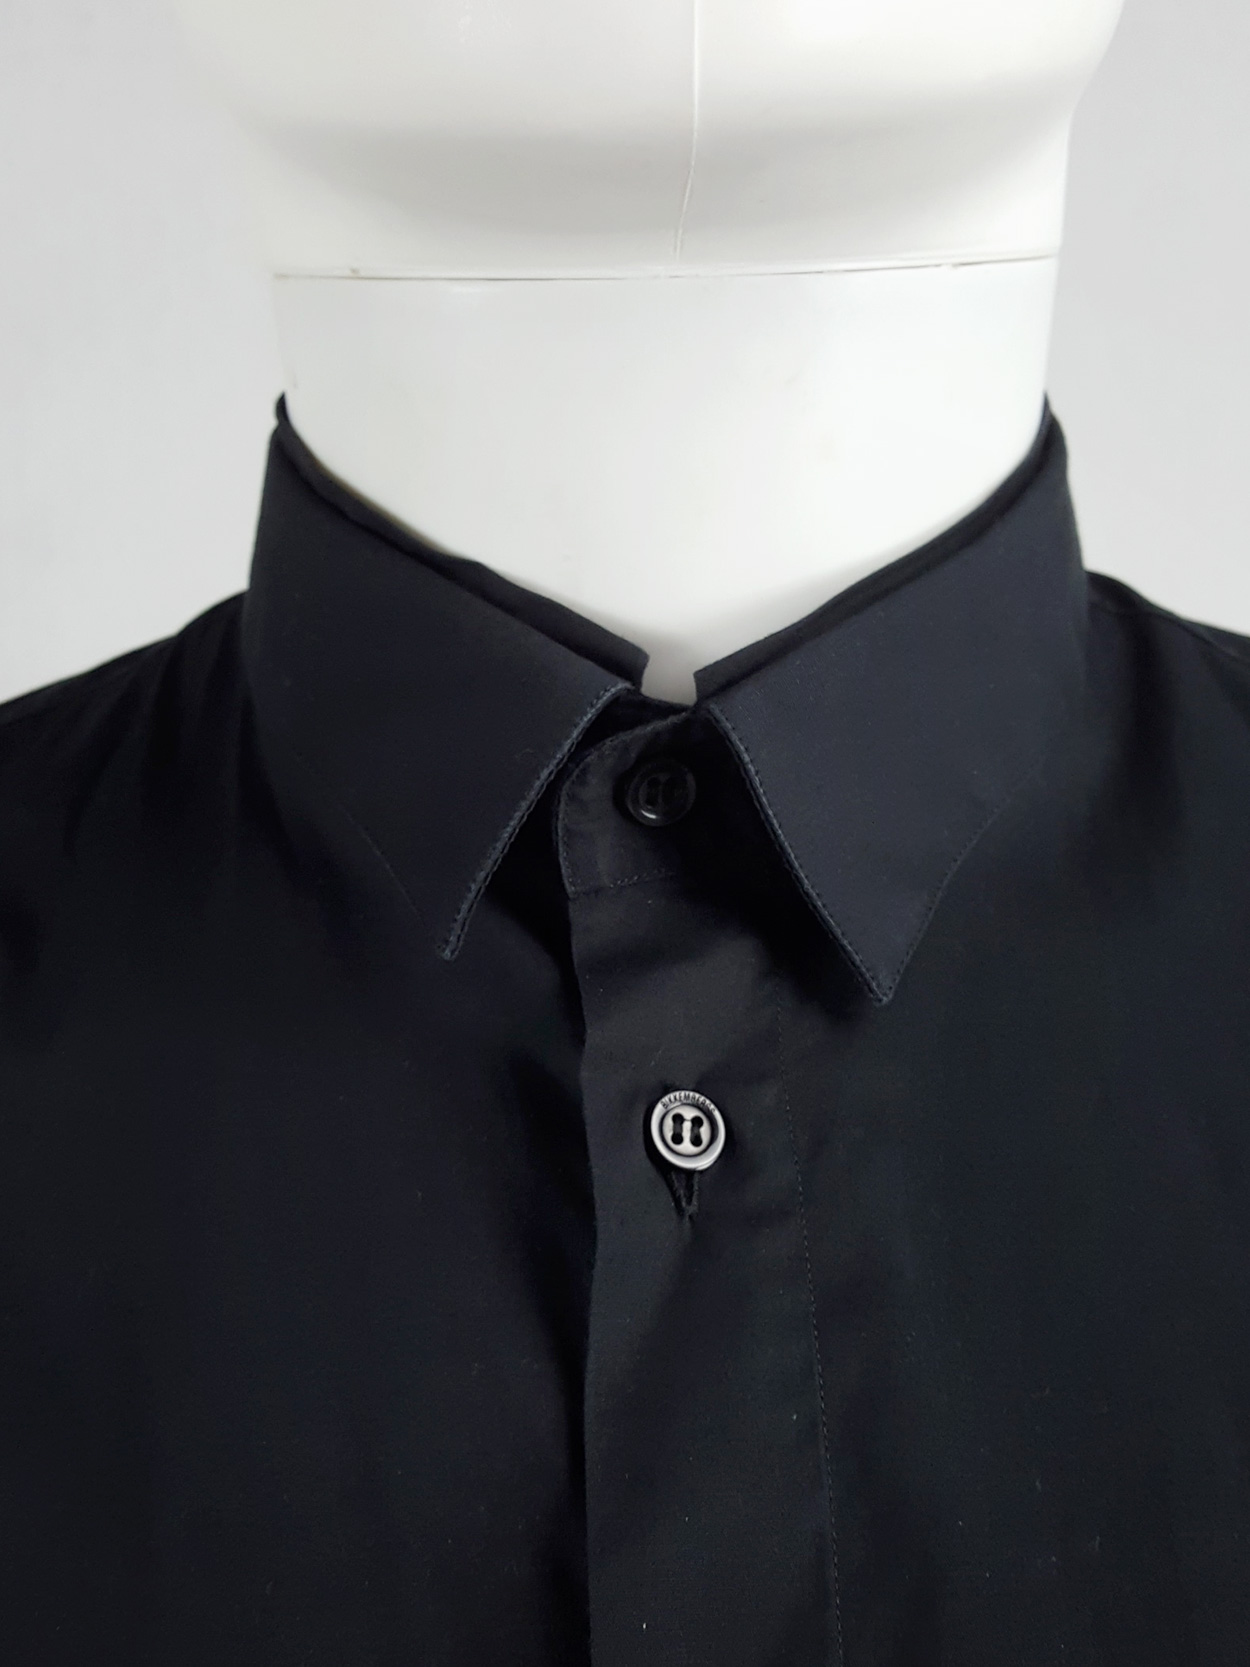 Dirk Bikkembergs black shirt with displaced collar - V A N II T A S